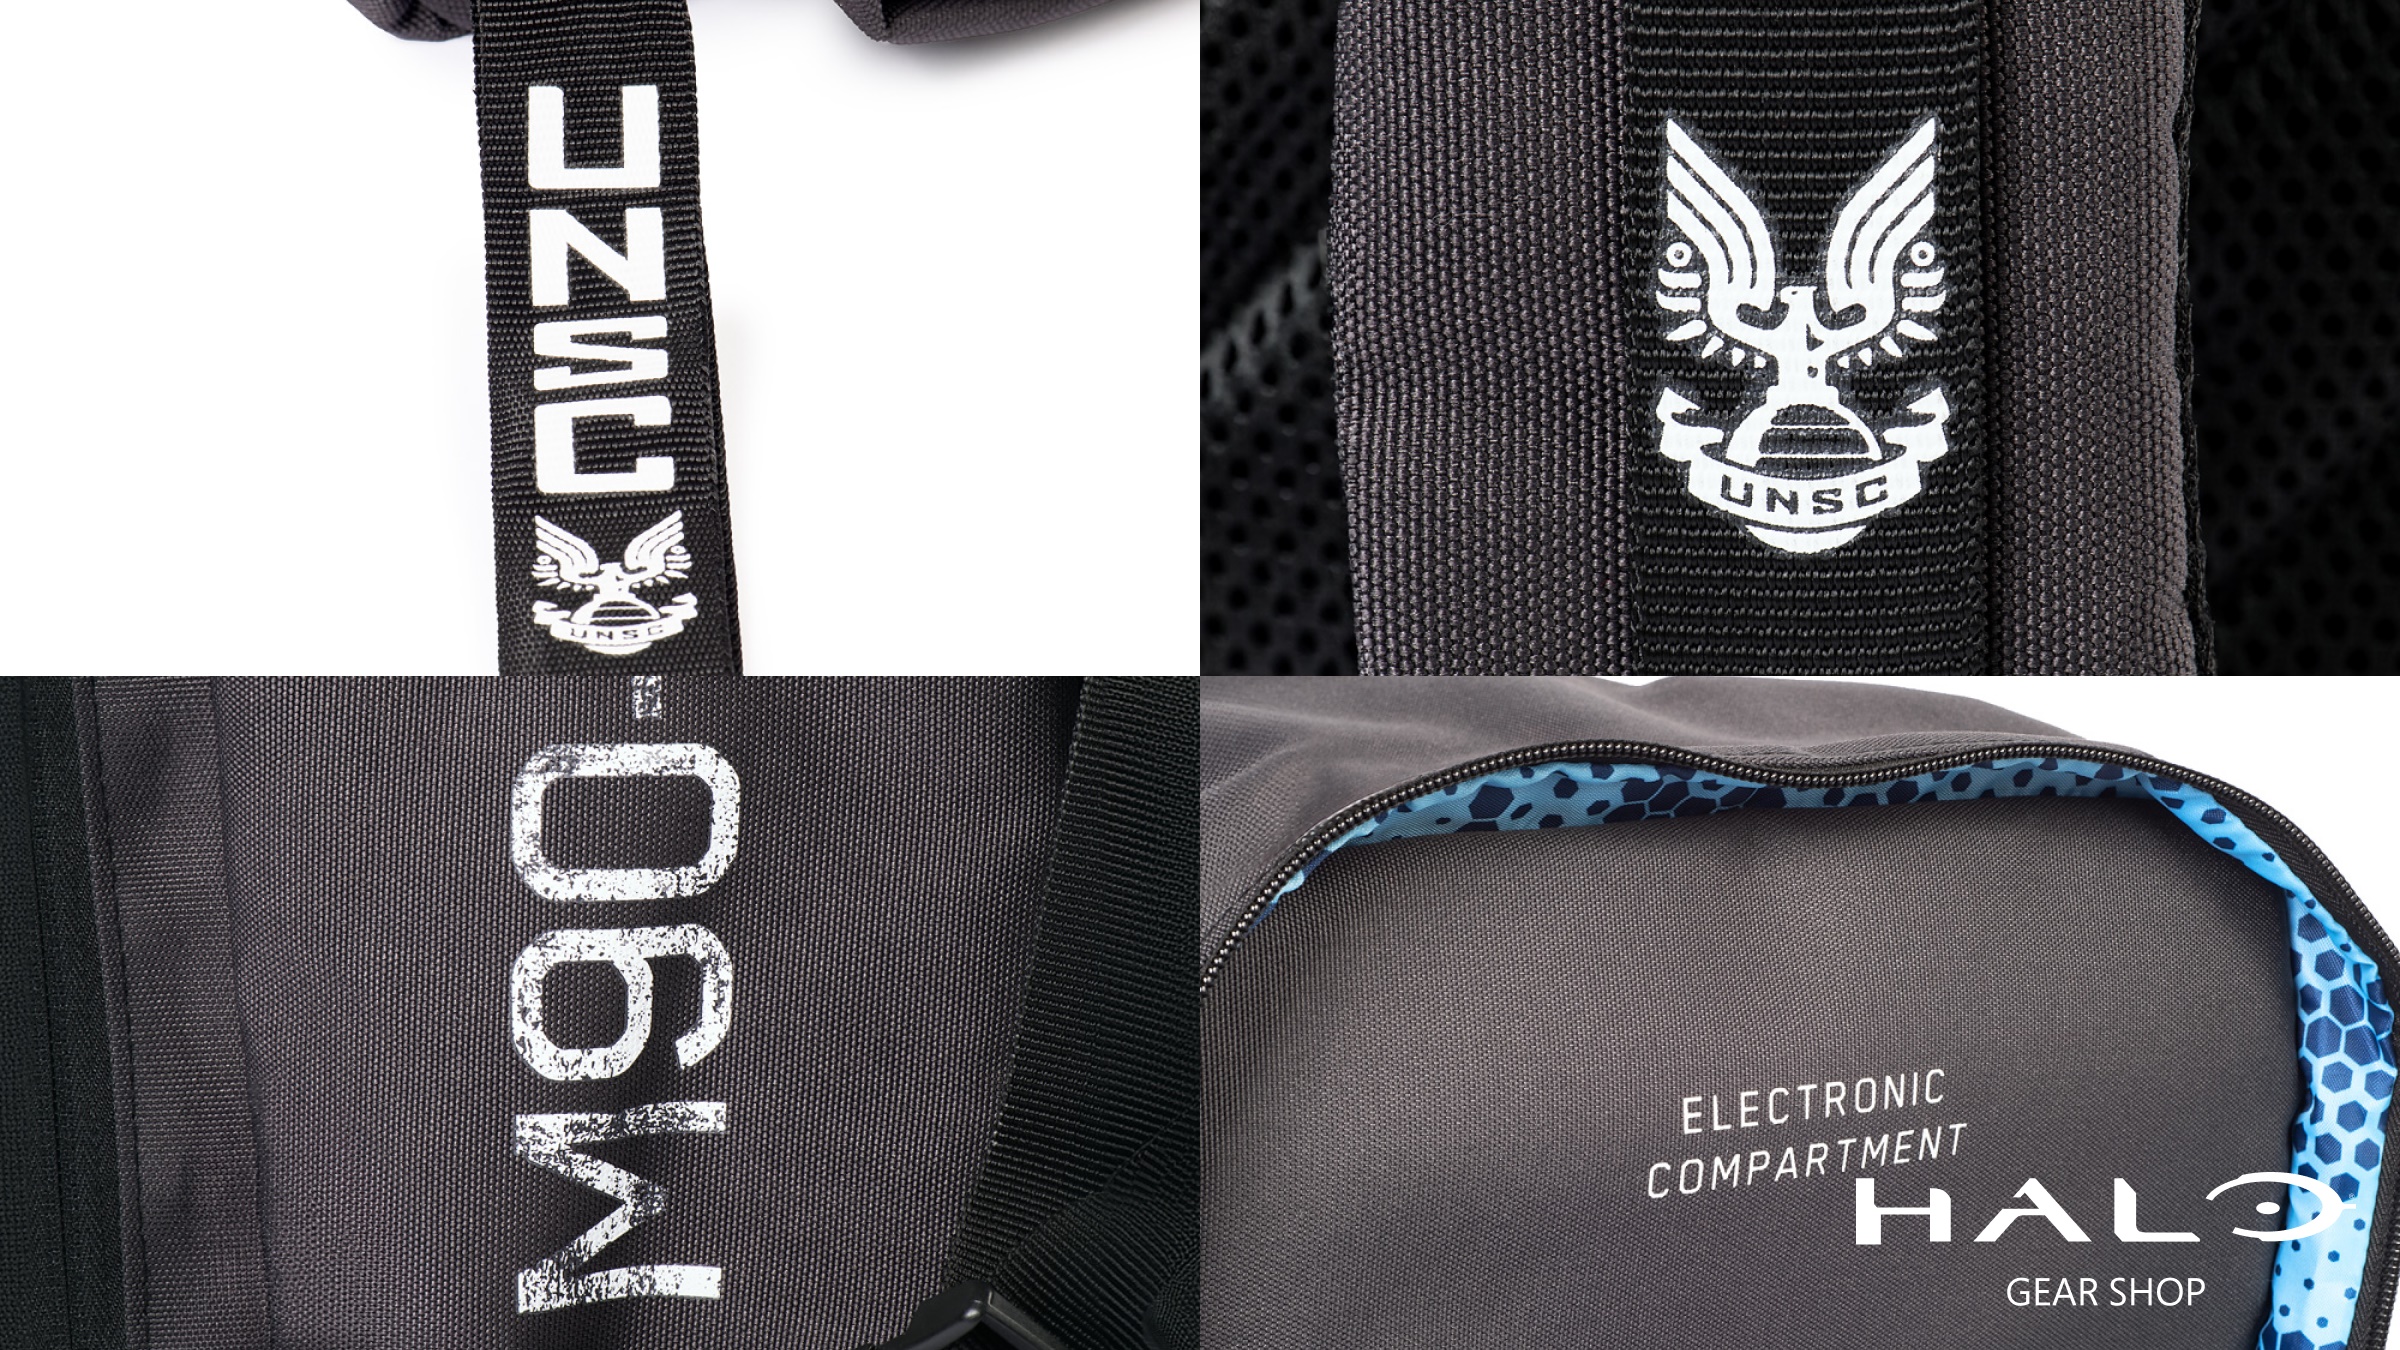 Image of details and decals on the Halo Tactical Backpack